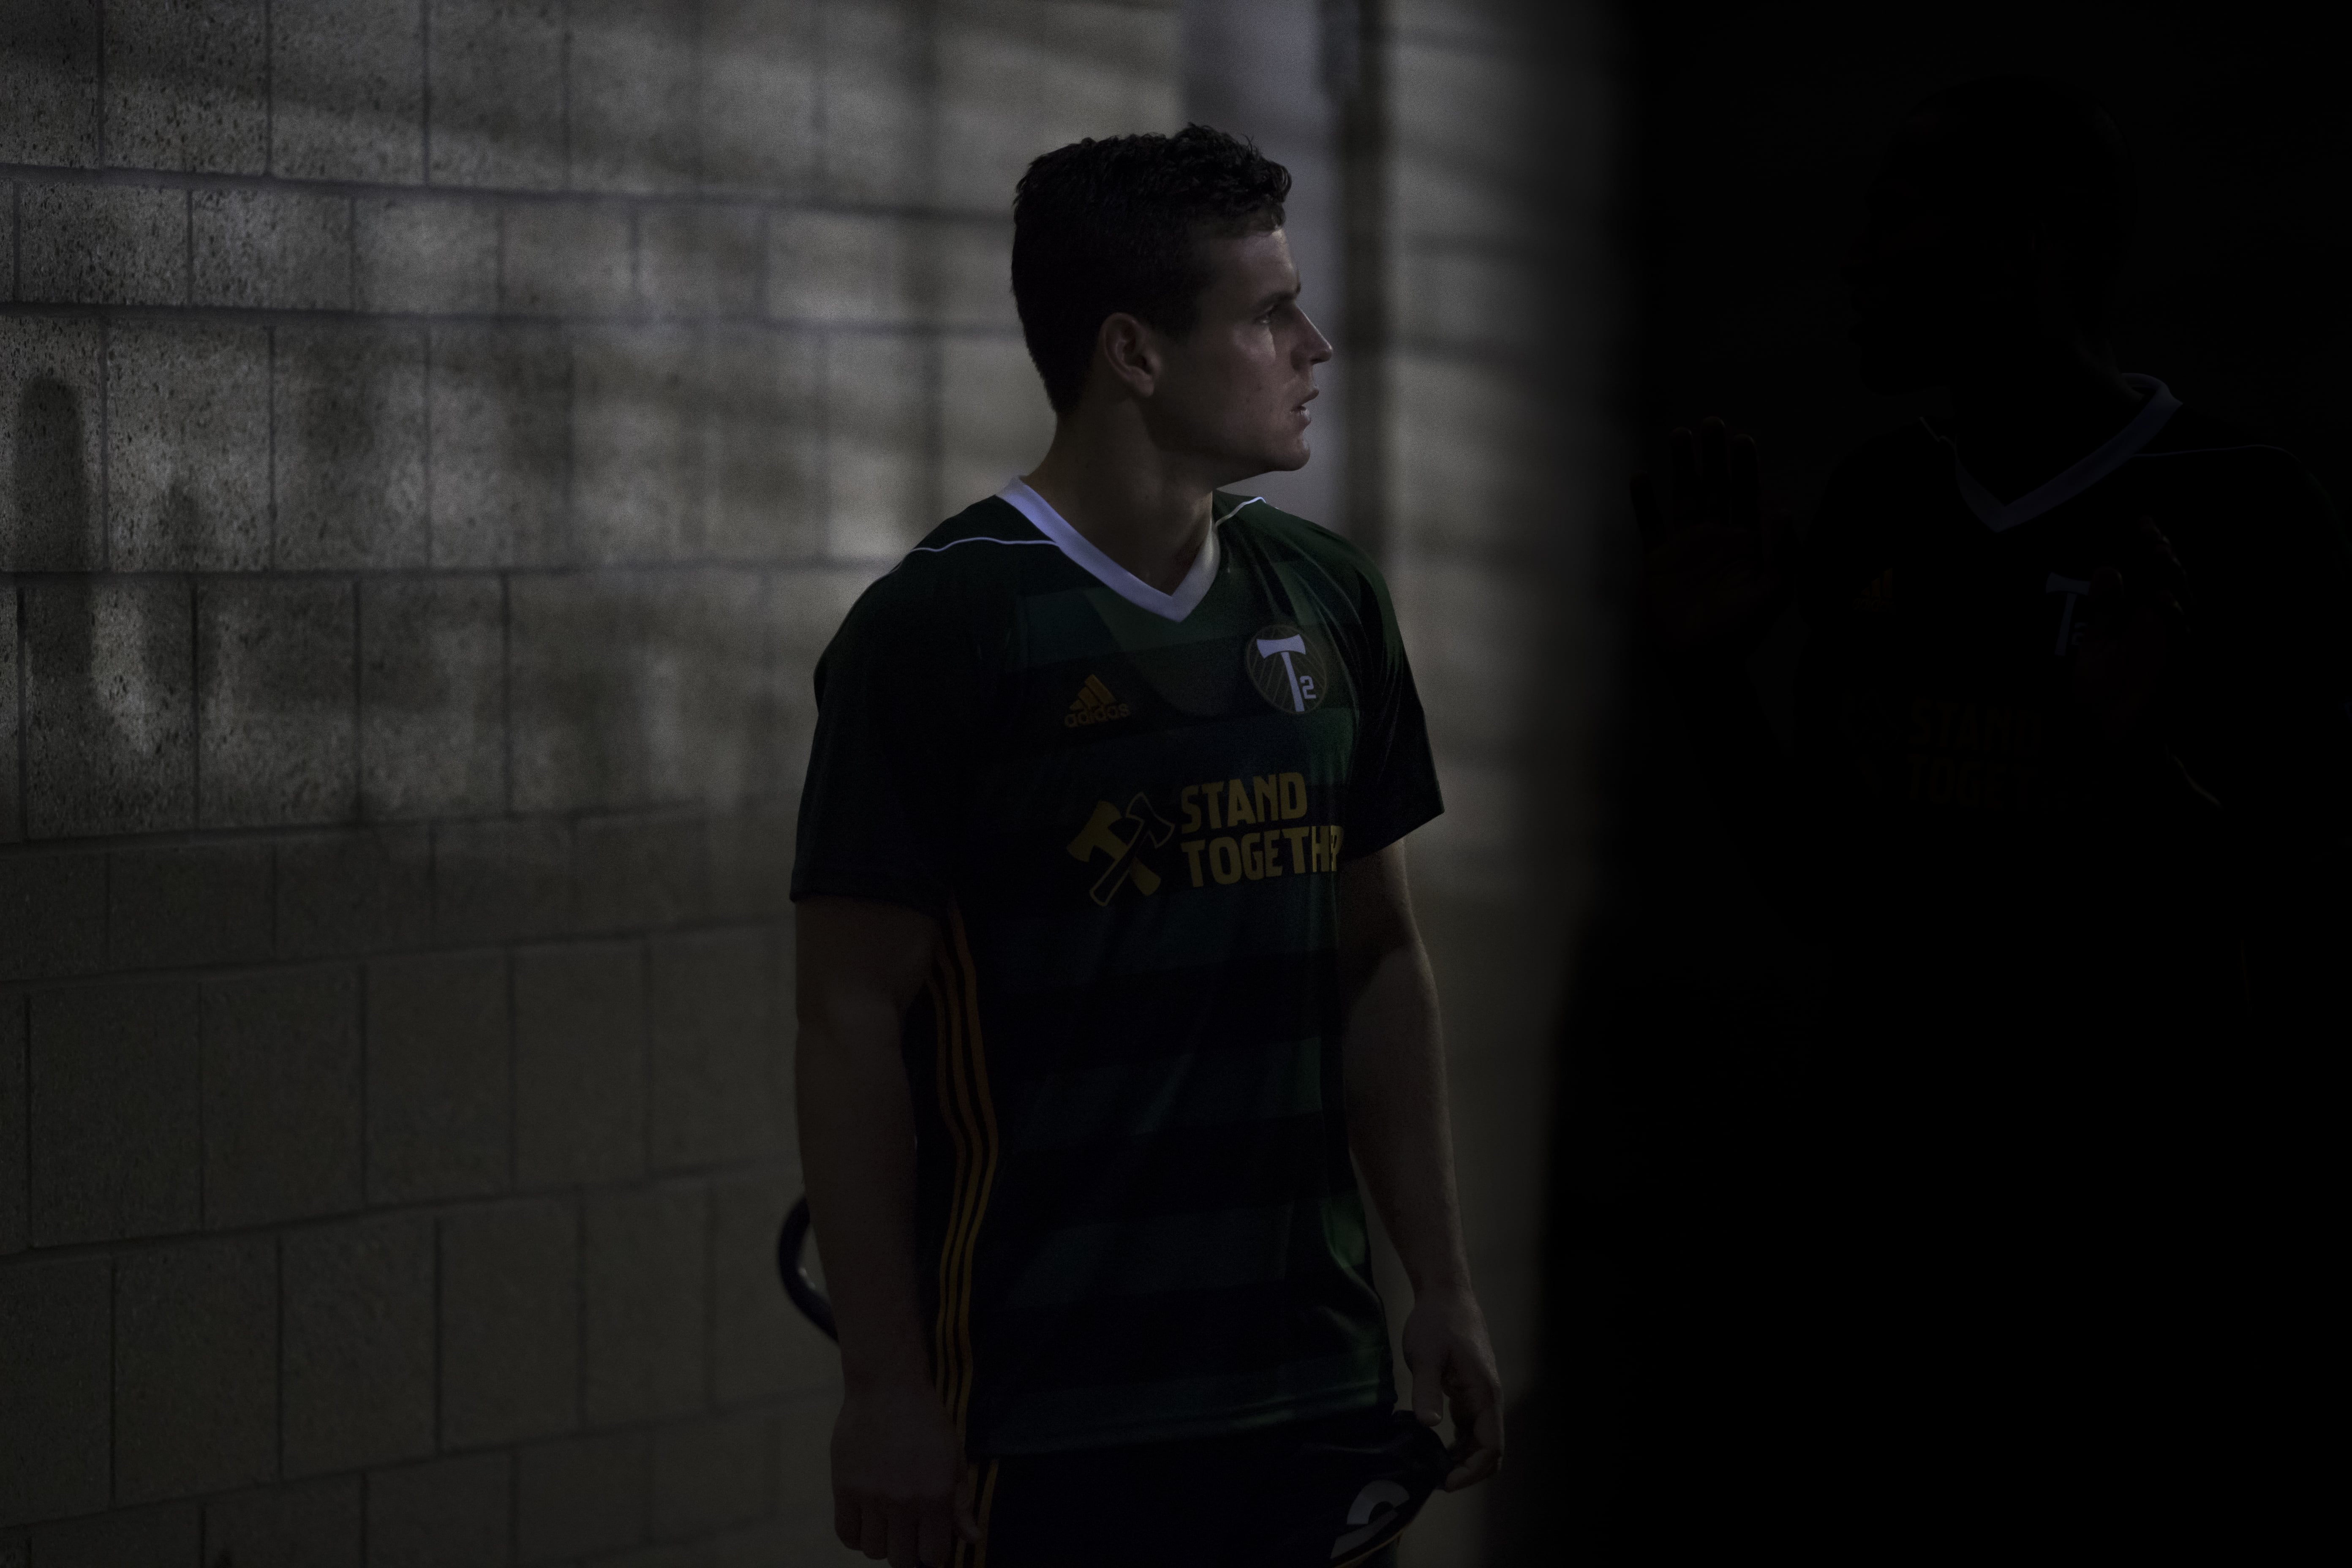 Foster Langsdorf looks towards Merlo Field before retuning to the pitch after halftime in a T2 game against Las Vegas on Saturday, March 23, 2019.